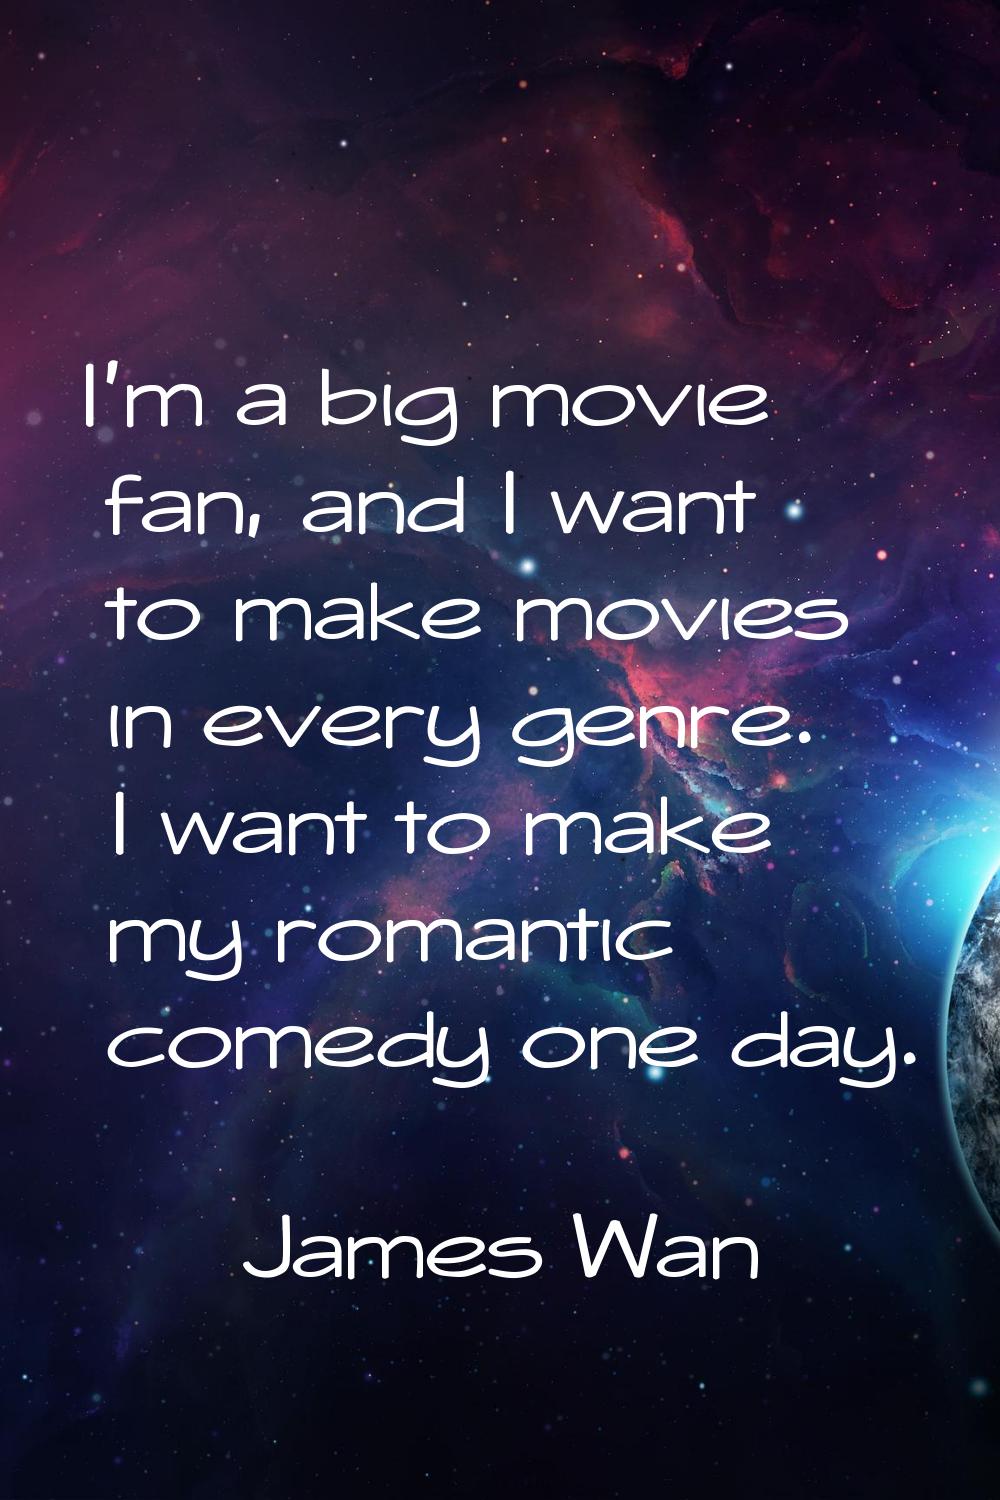 I'm a big movie fan, and I want to make movies in every genre. I want to make my romantic comedy on